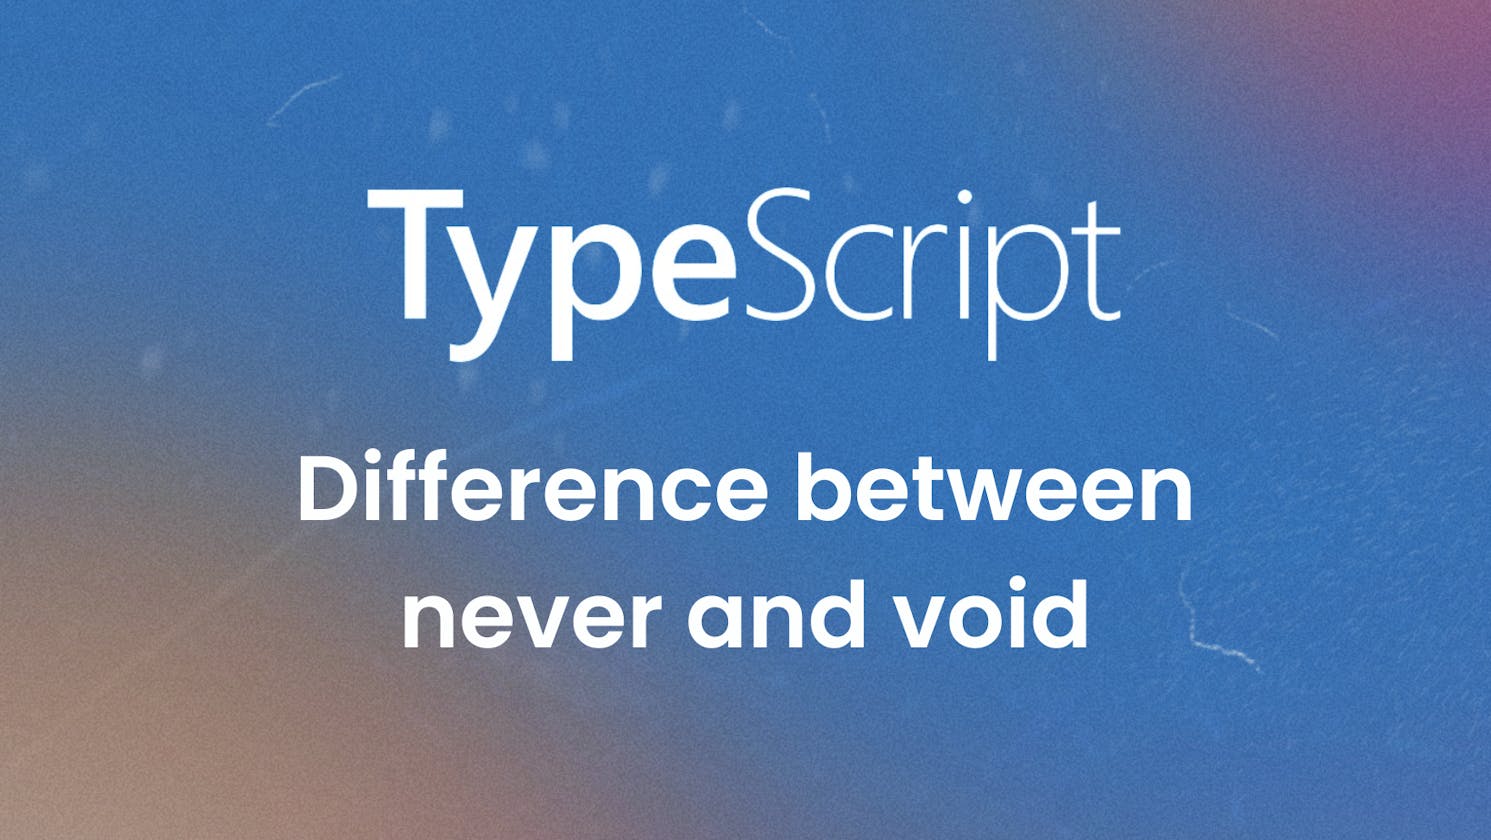 What’s the difference between never and void in TypeScript?